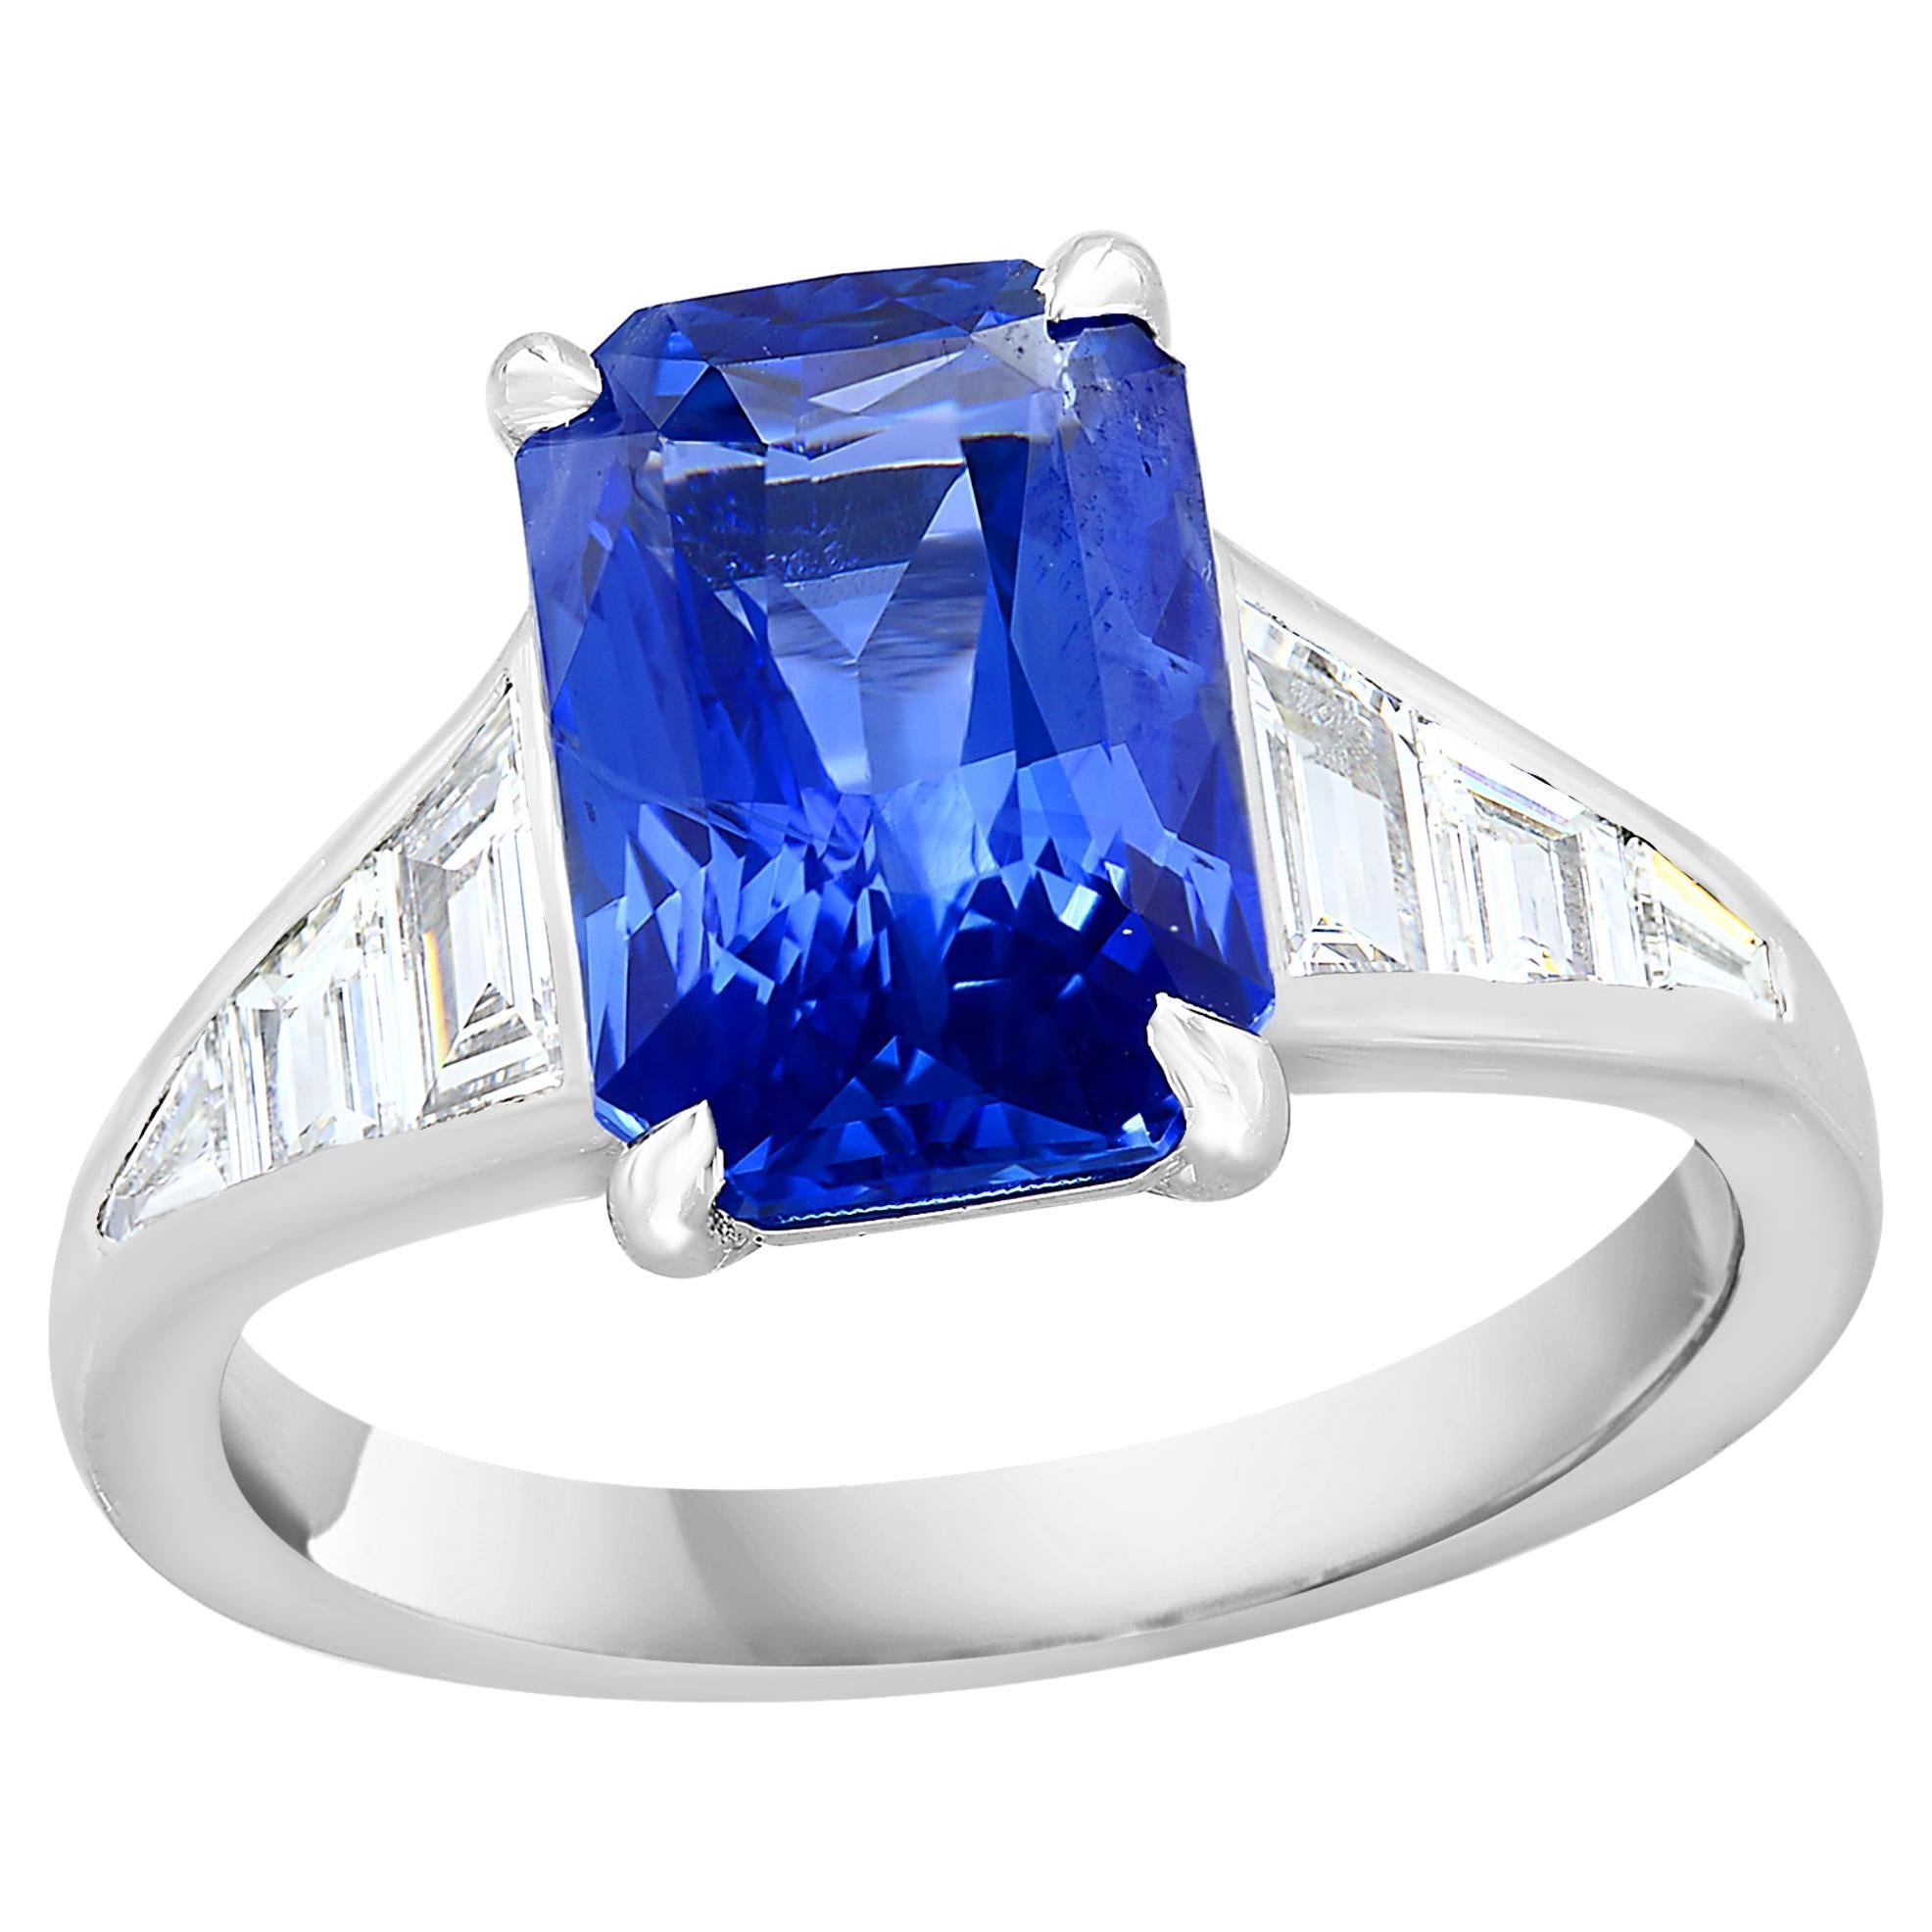 4.13 Carat Emerald Cut Blue Sapphire and Diamond Engagement Ring in Platinum For Sale